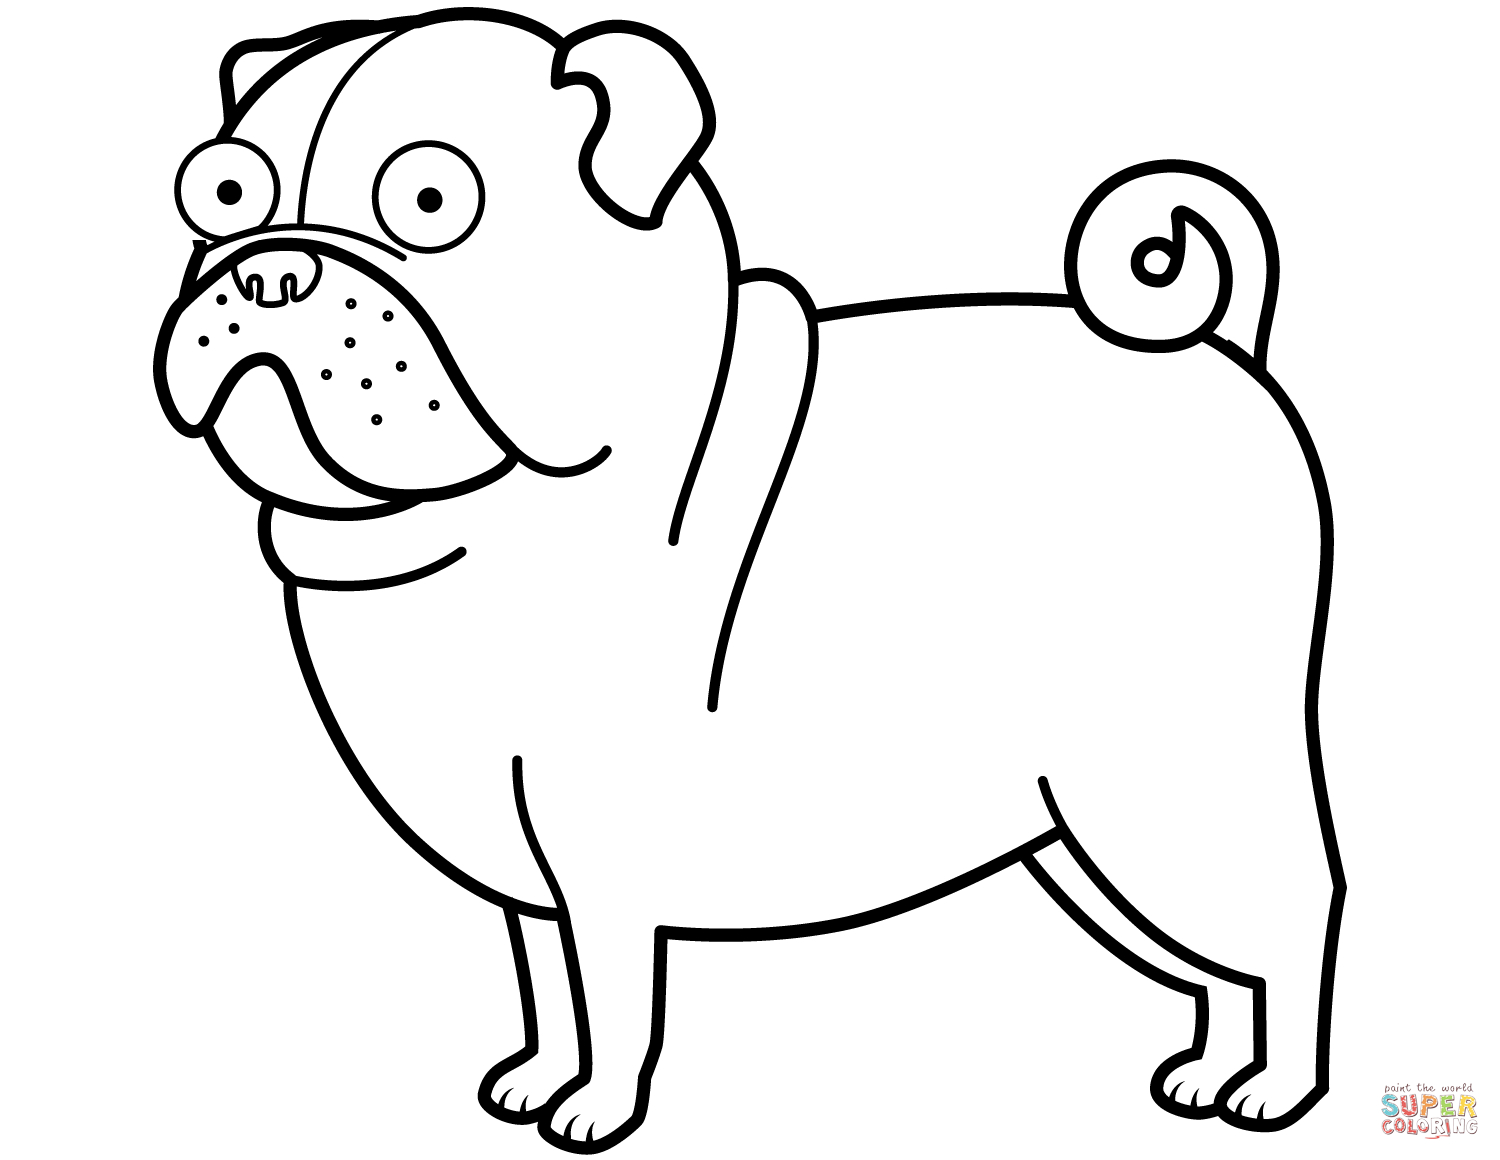 How To Make An Origami Pug Pug Dog Coloring Page Free Printable Coloring Pages